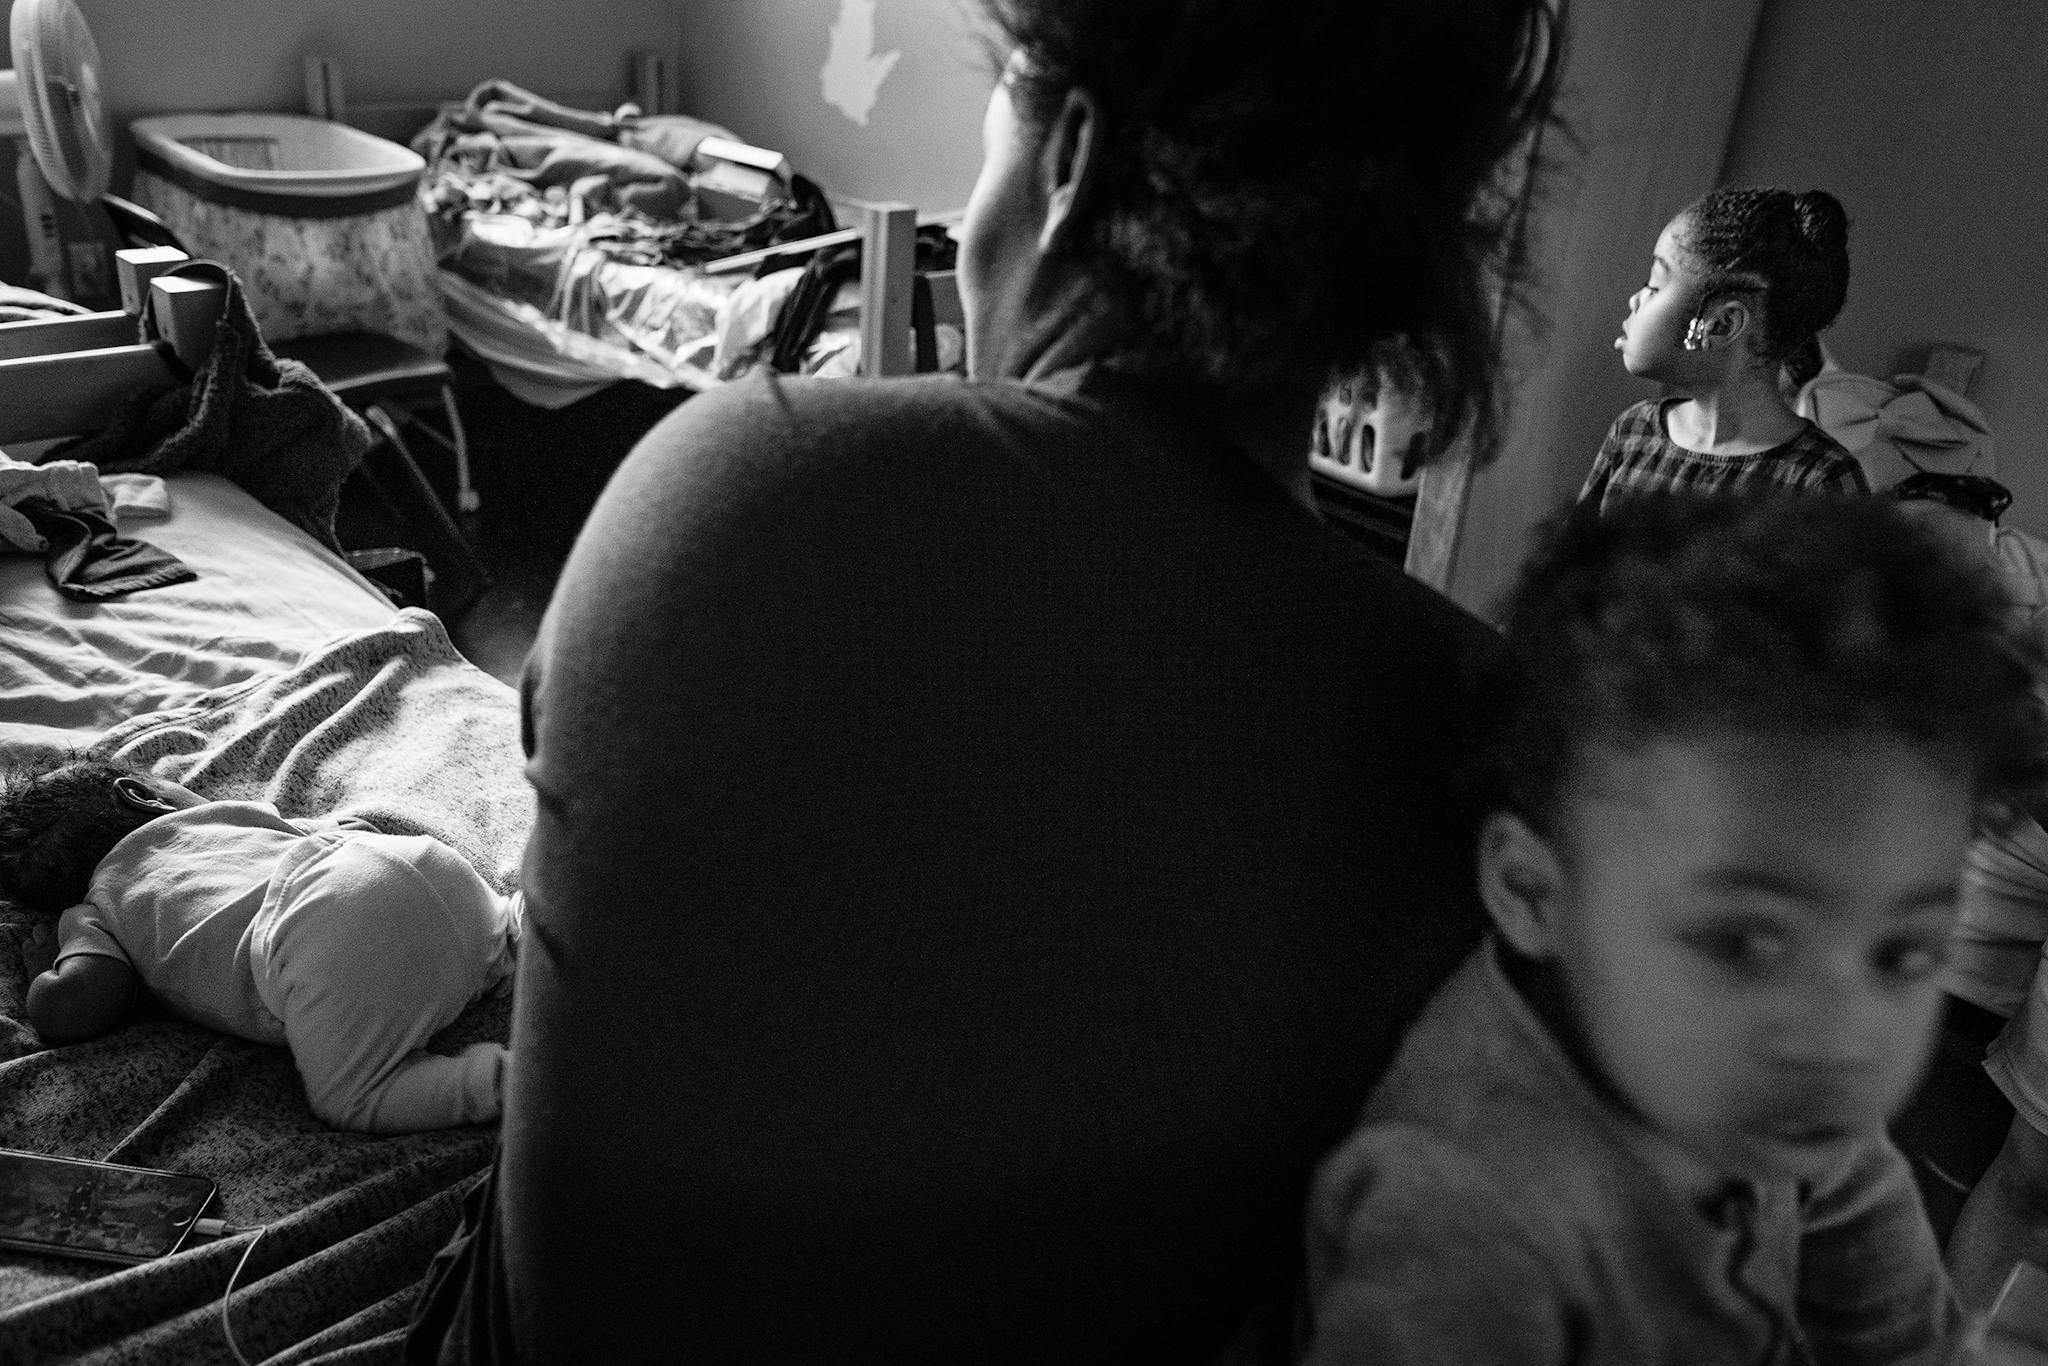 Whitney Bryant sits in her room at a shelter with three of her children—Kadyn, 6, Kasir, 2, and Khali, an infant—in February 2020.